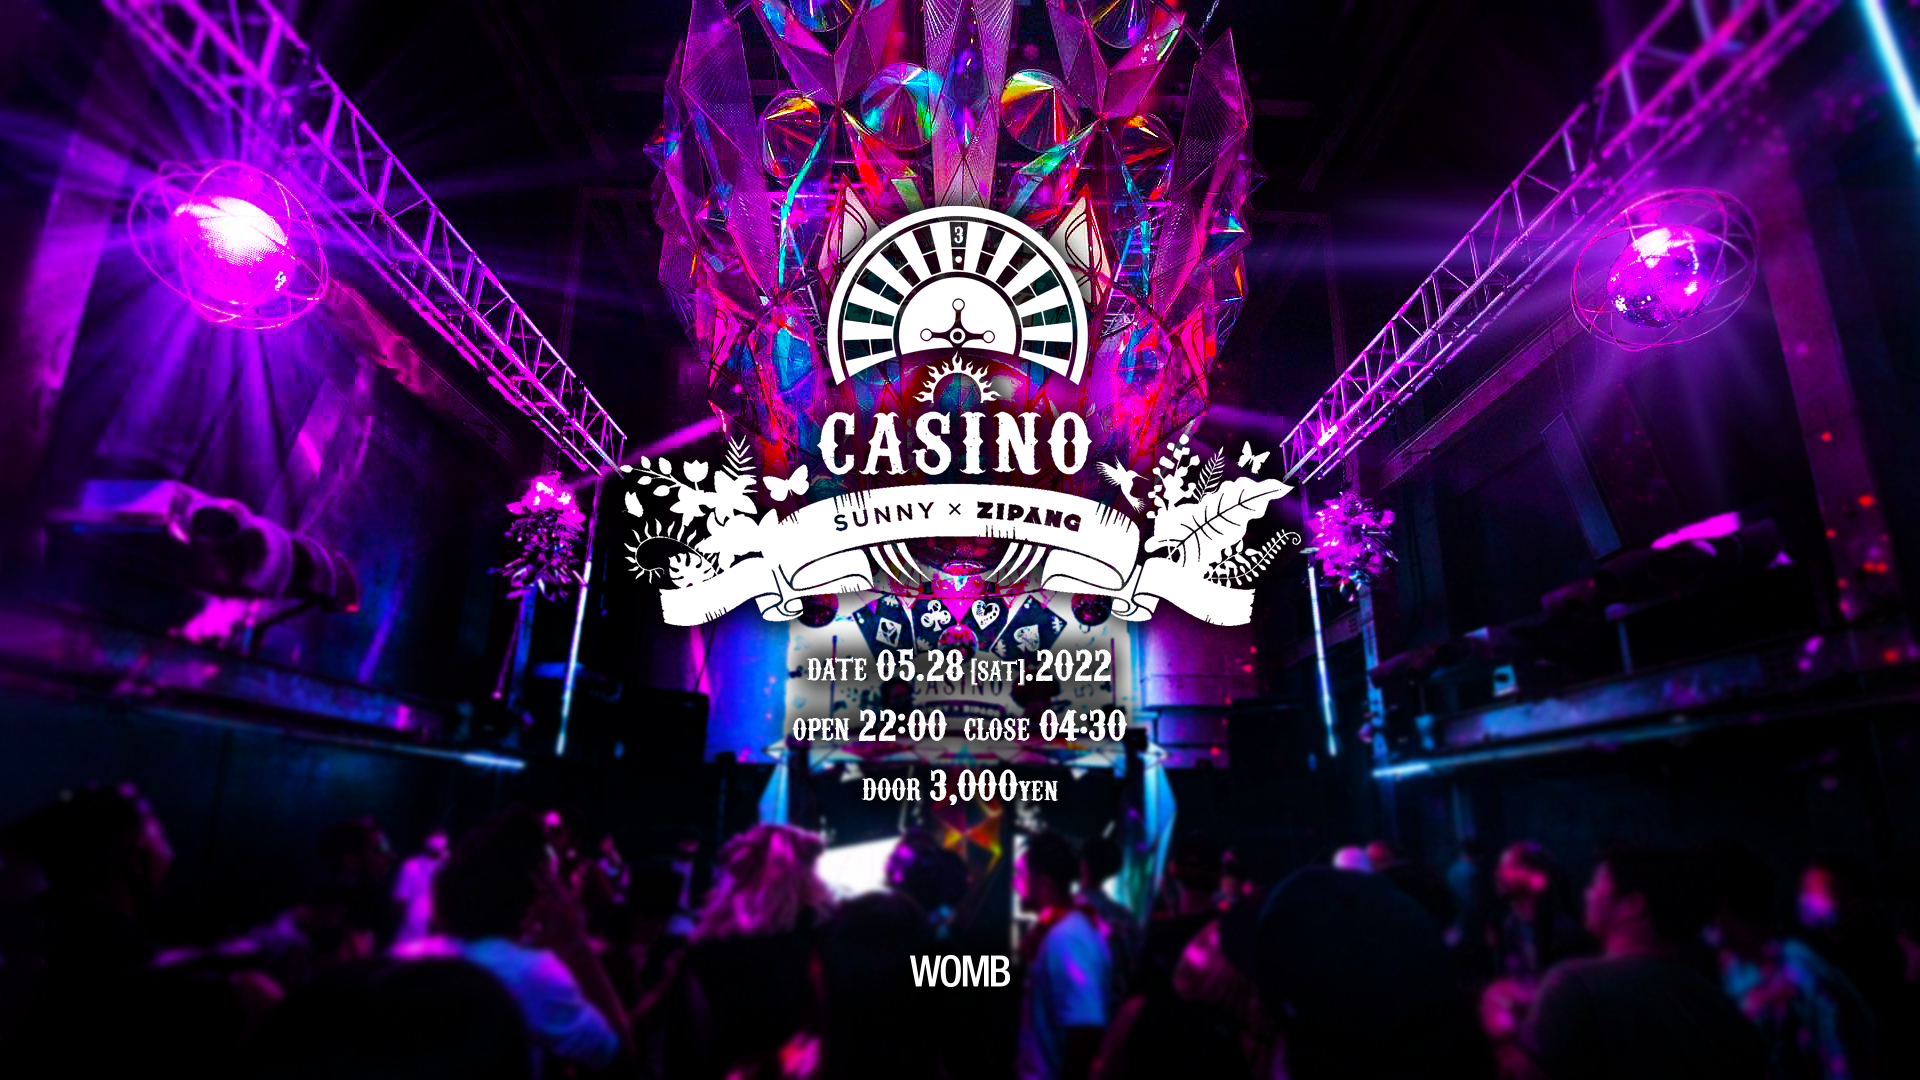 “CASINO” presented by SUNNY × ZIPANG